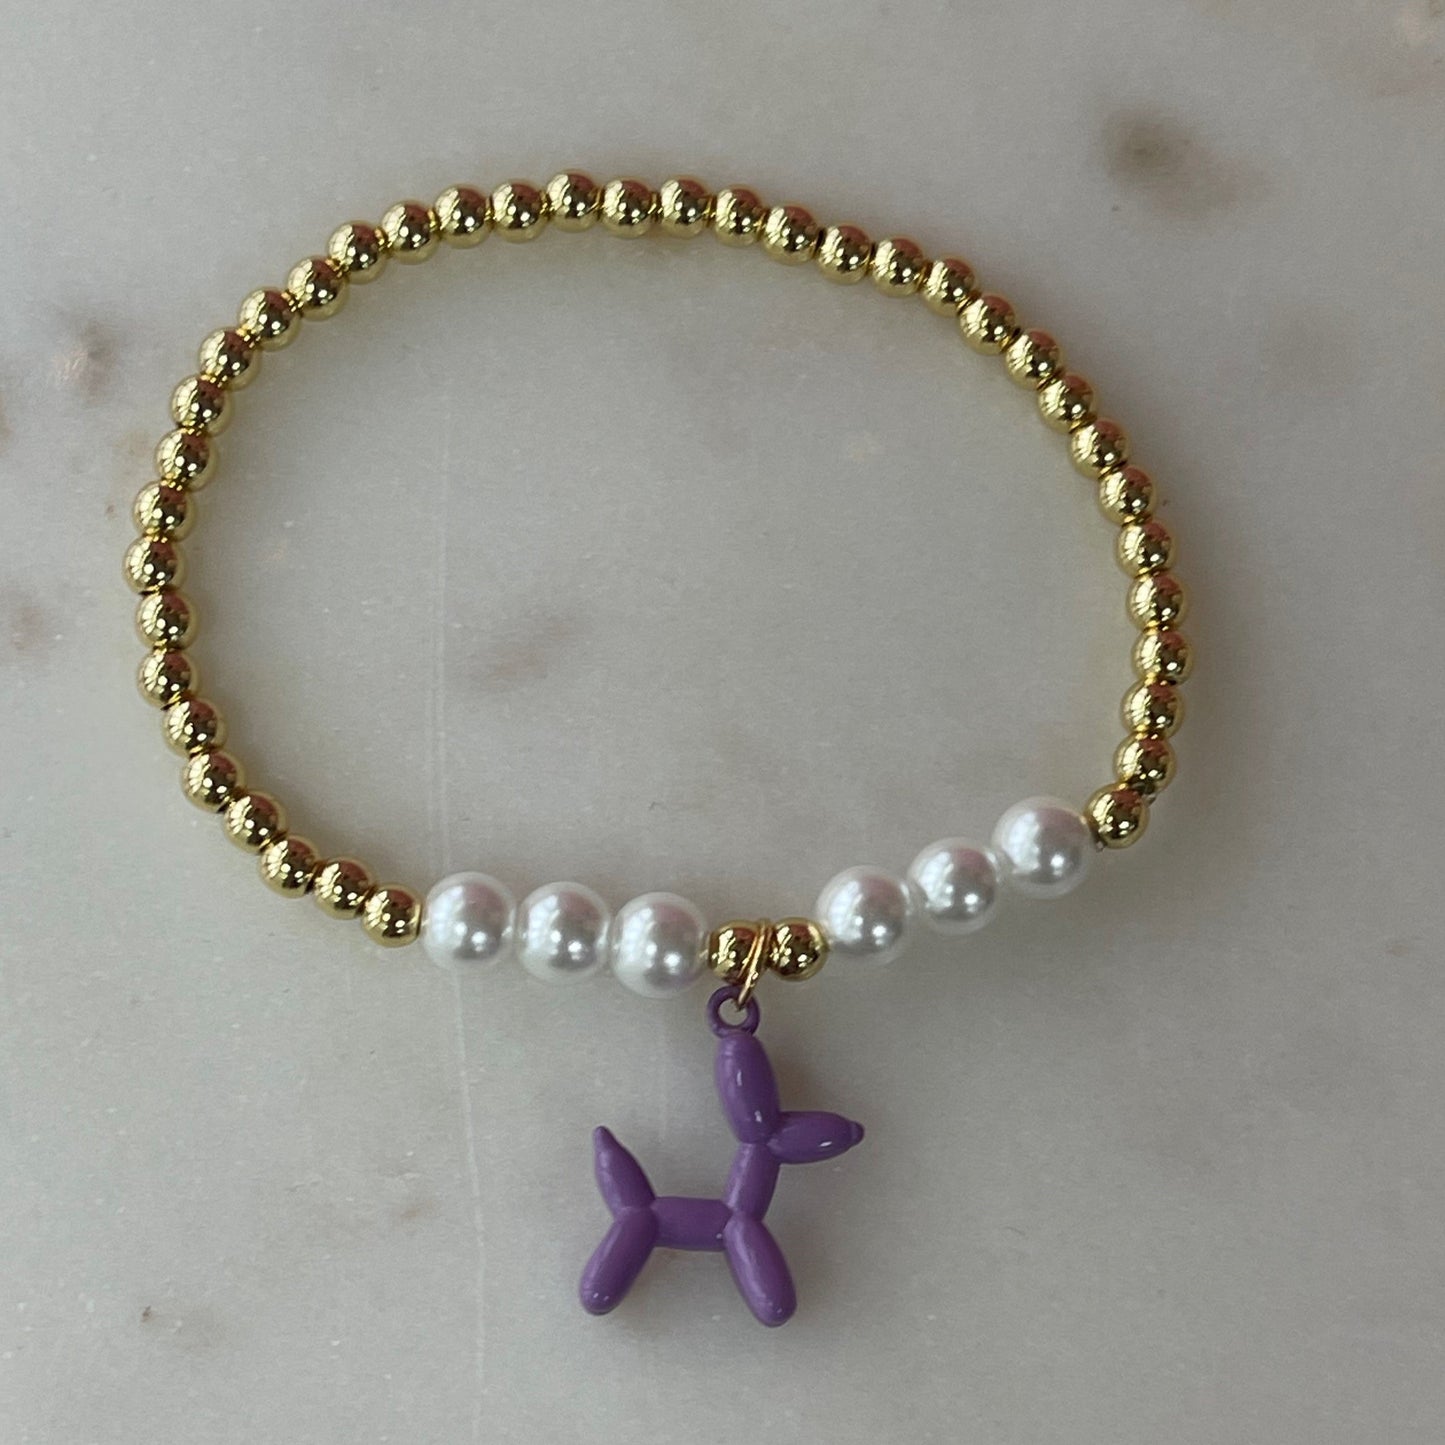 gold and white pearl band bracelet with a purple balloon shaped dog